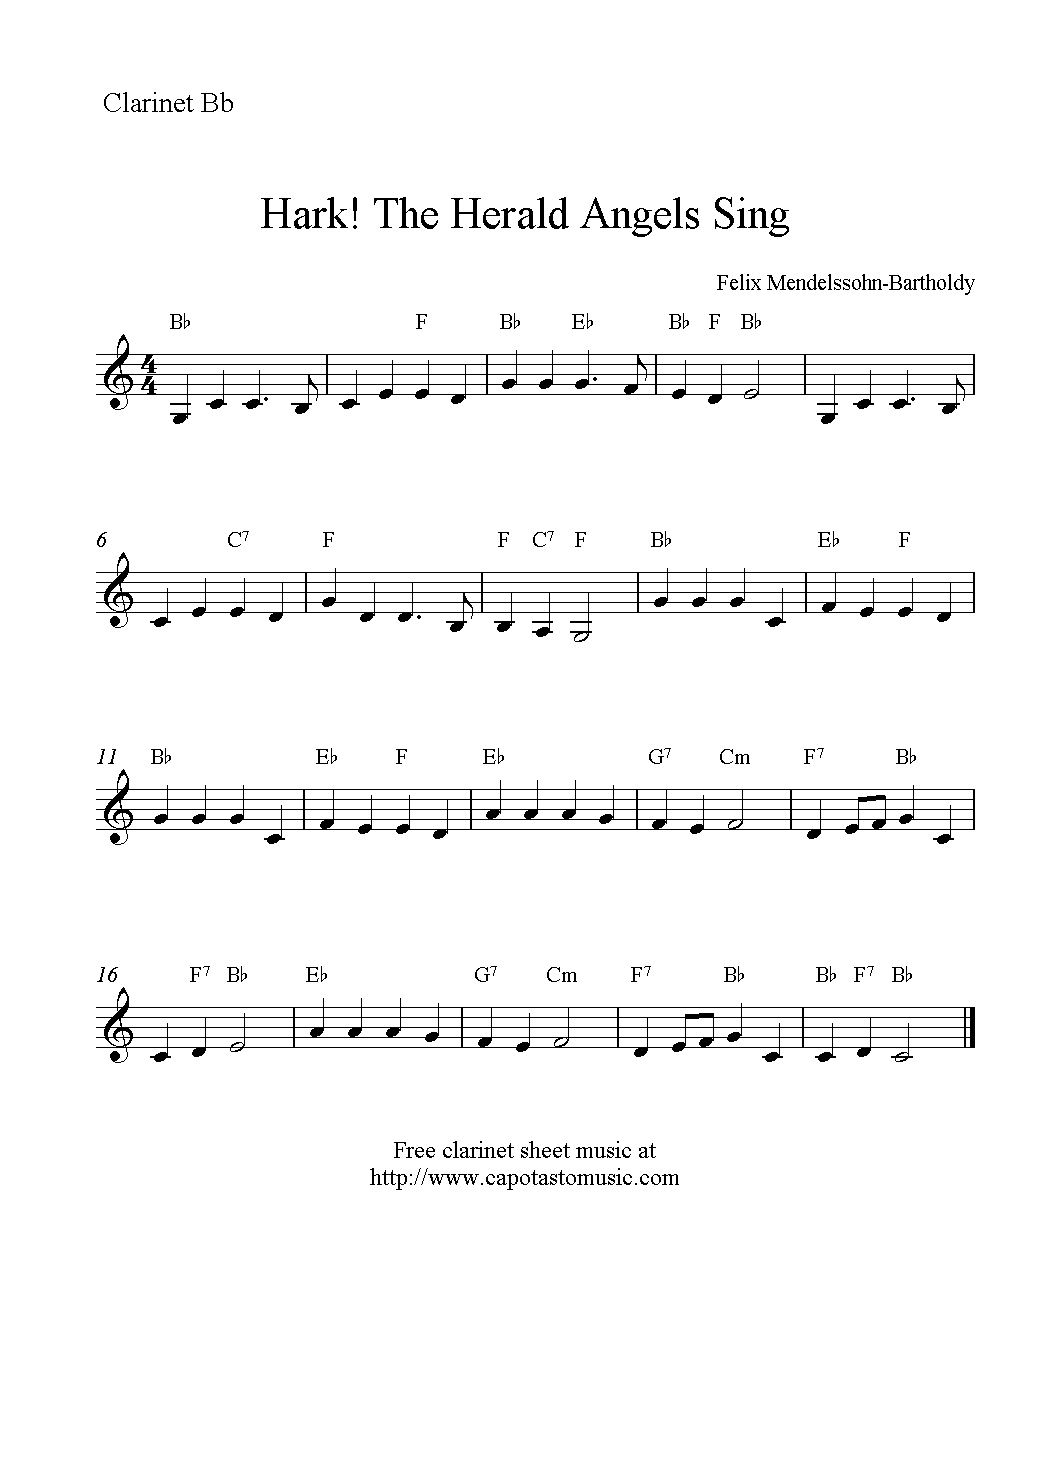 Hark! The Herald Angels Sing, Free Christmas Clarinet Sheet Music Notes - Free Printable Christmas Sheet Music For Clarinet